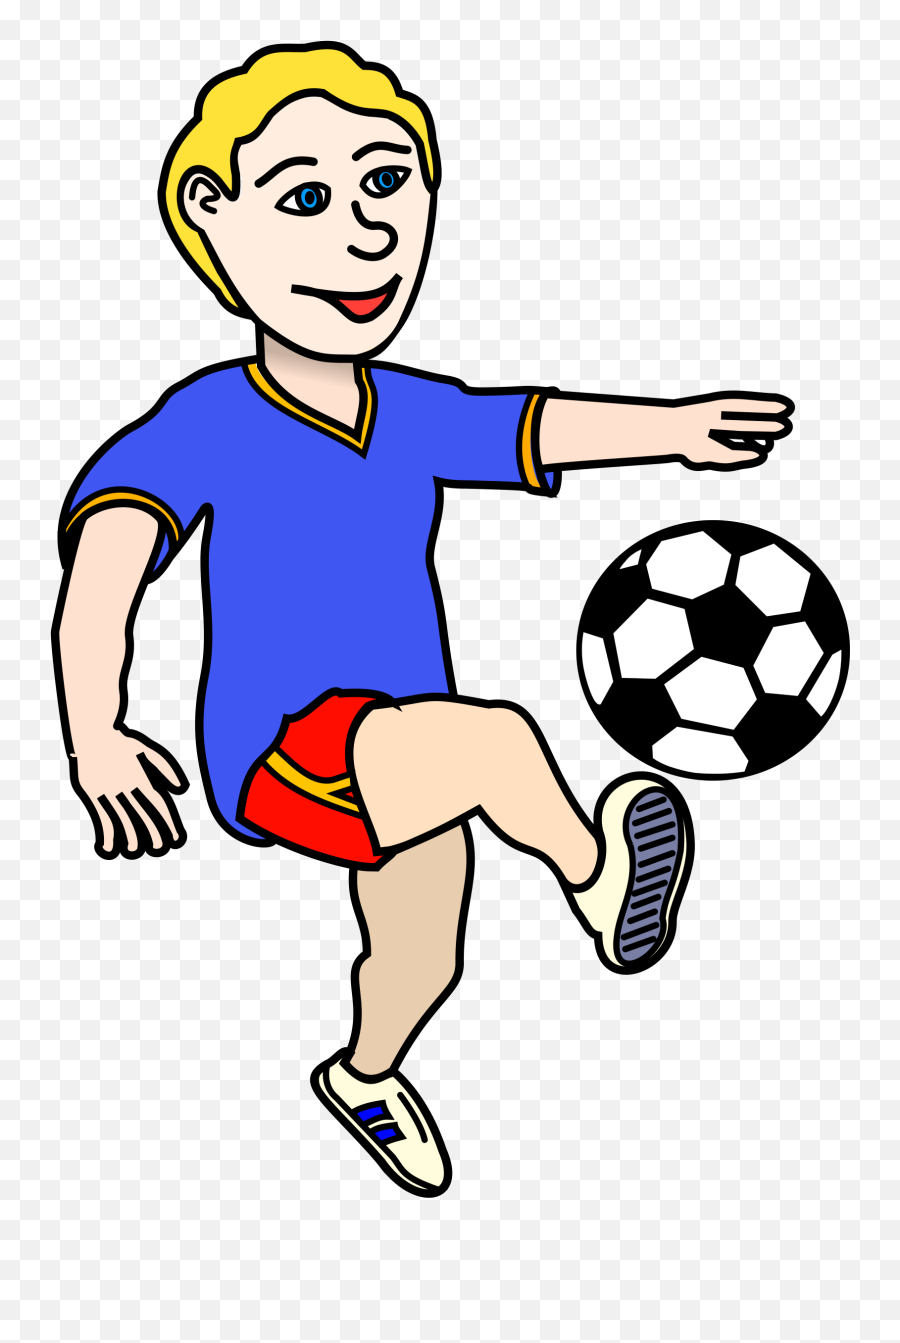 Library Of Football Player Picture - Clip Art Of Playing Football Emoji,Football Player Clipart